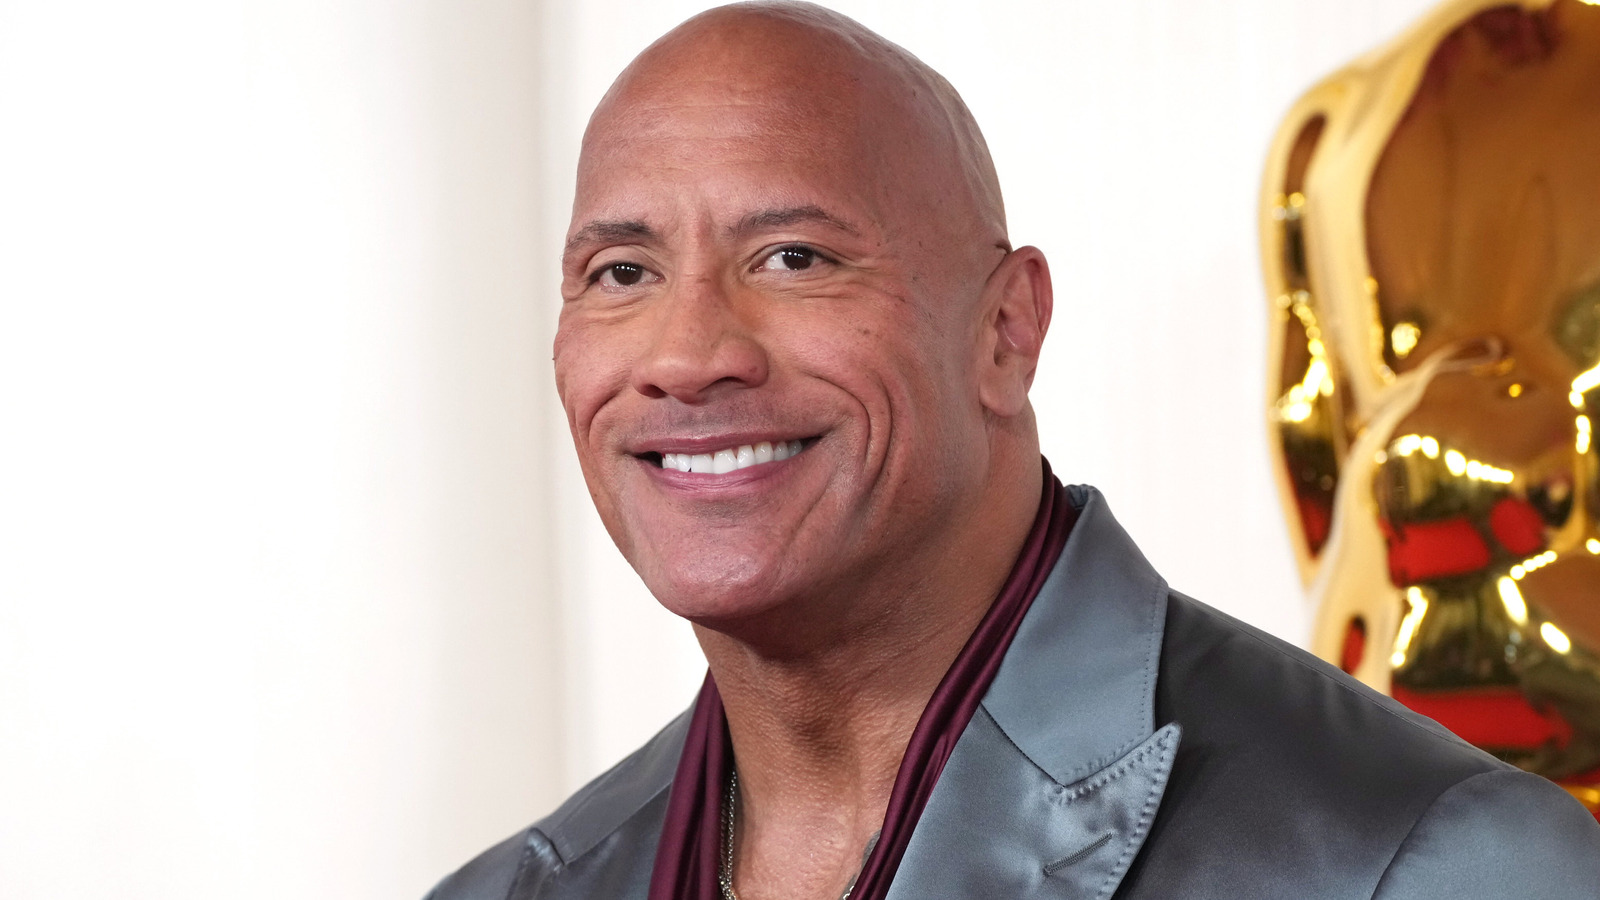 Dwayne 'The Rock' Johnson Teases More Matches Following WWE WrestleMania 40